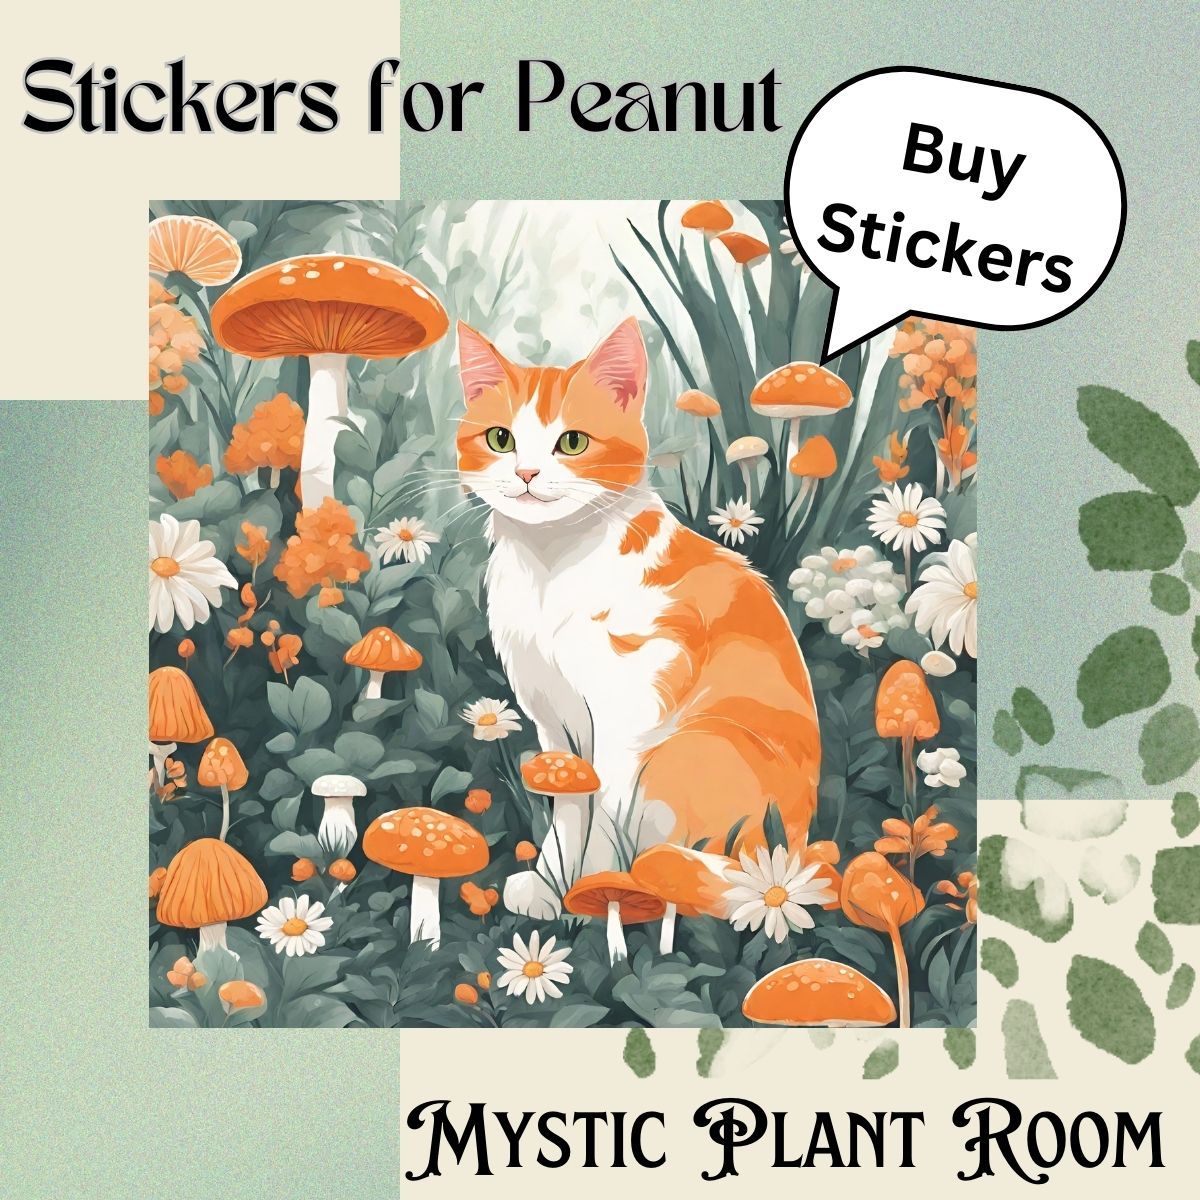 Stickers for Peanut